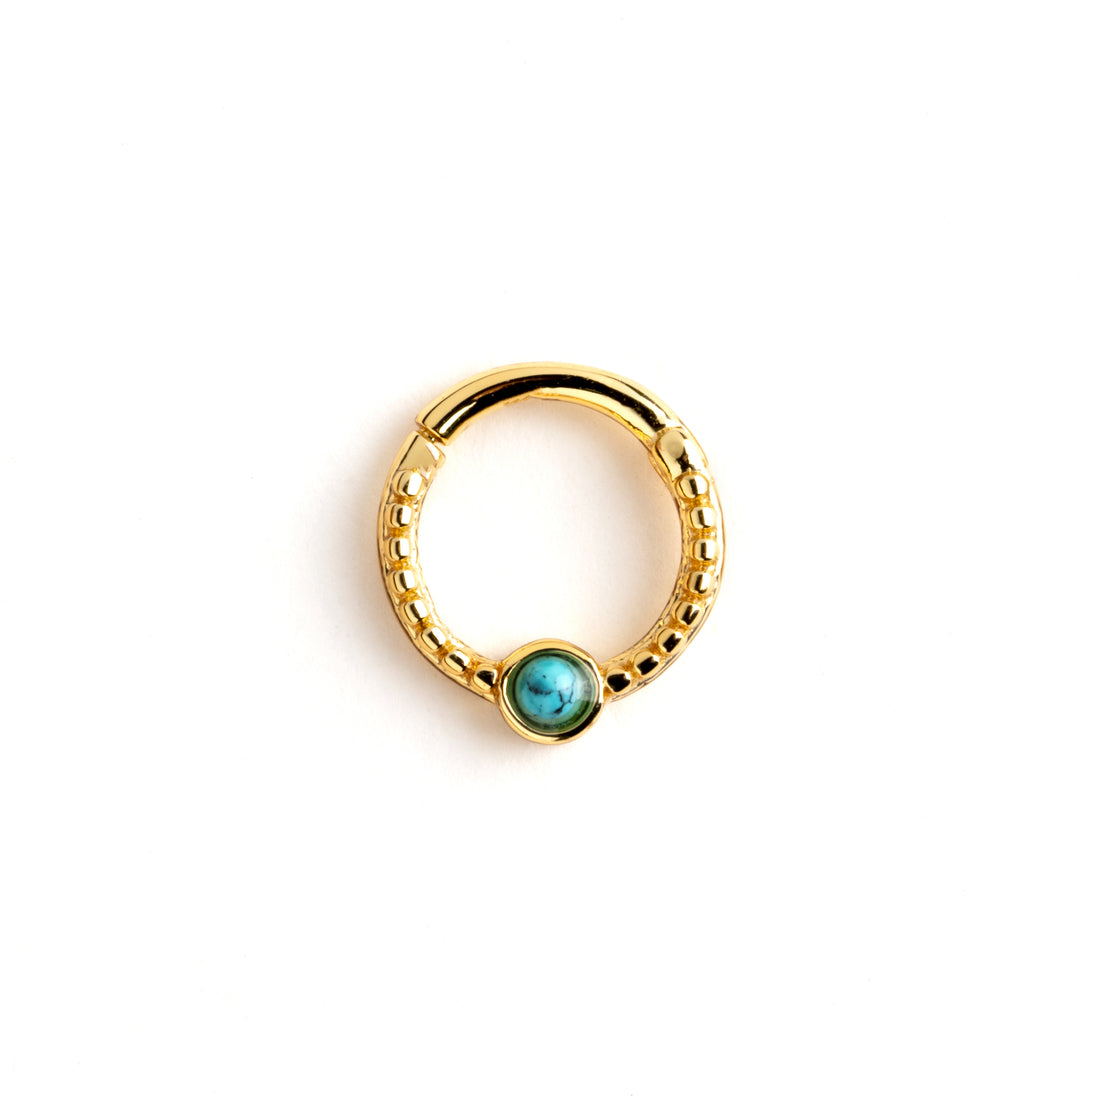 Dayaa gold surgical steel septum clicker with turquoise frontal view